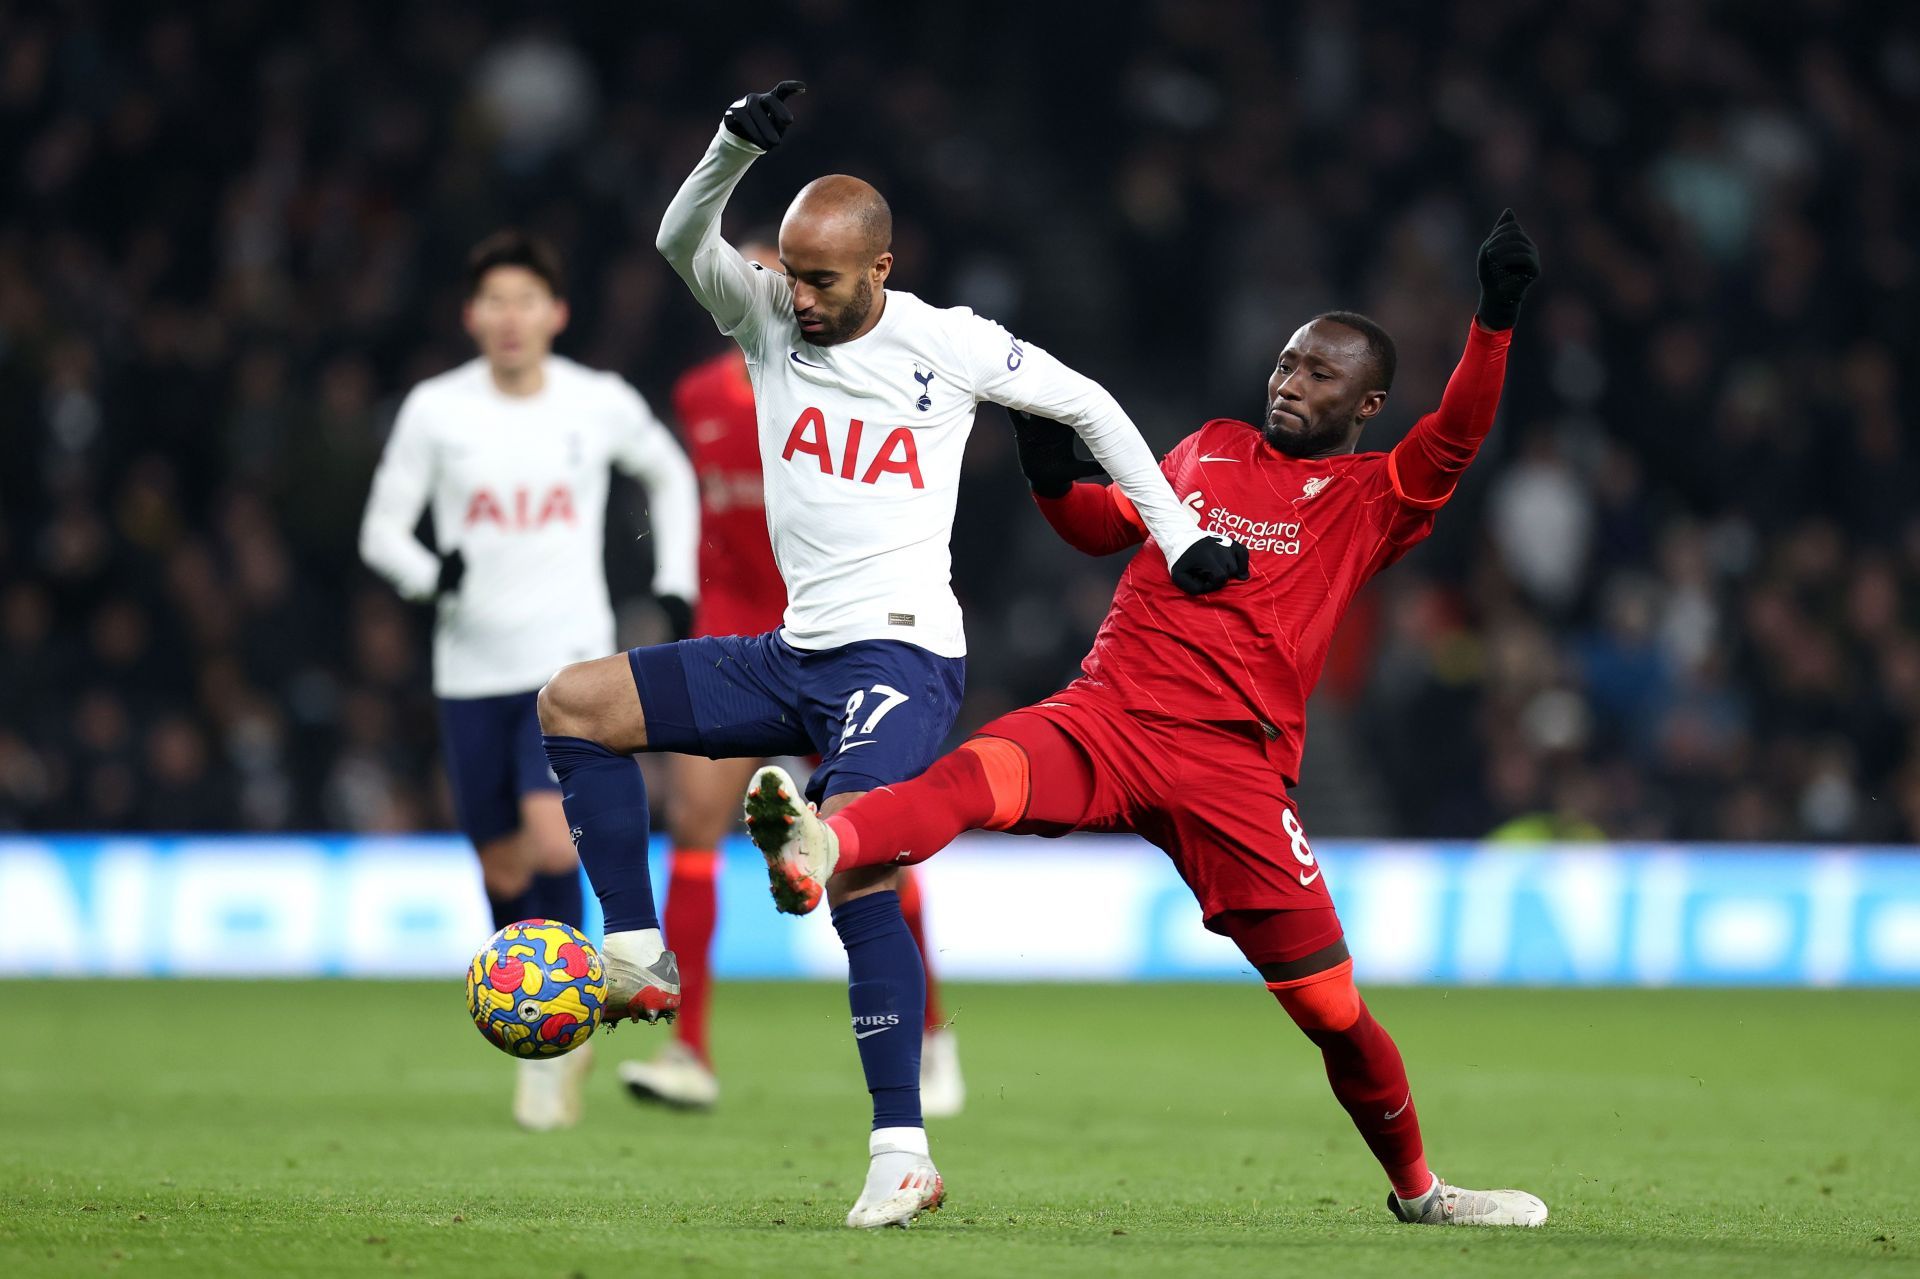 Tottenham Hotspur and Liverpool played a really tense game at the weekend